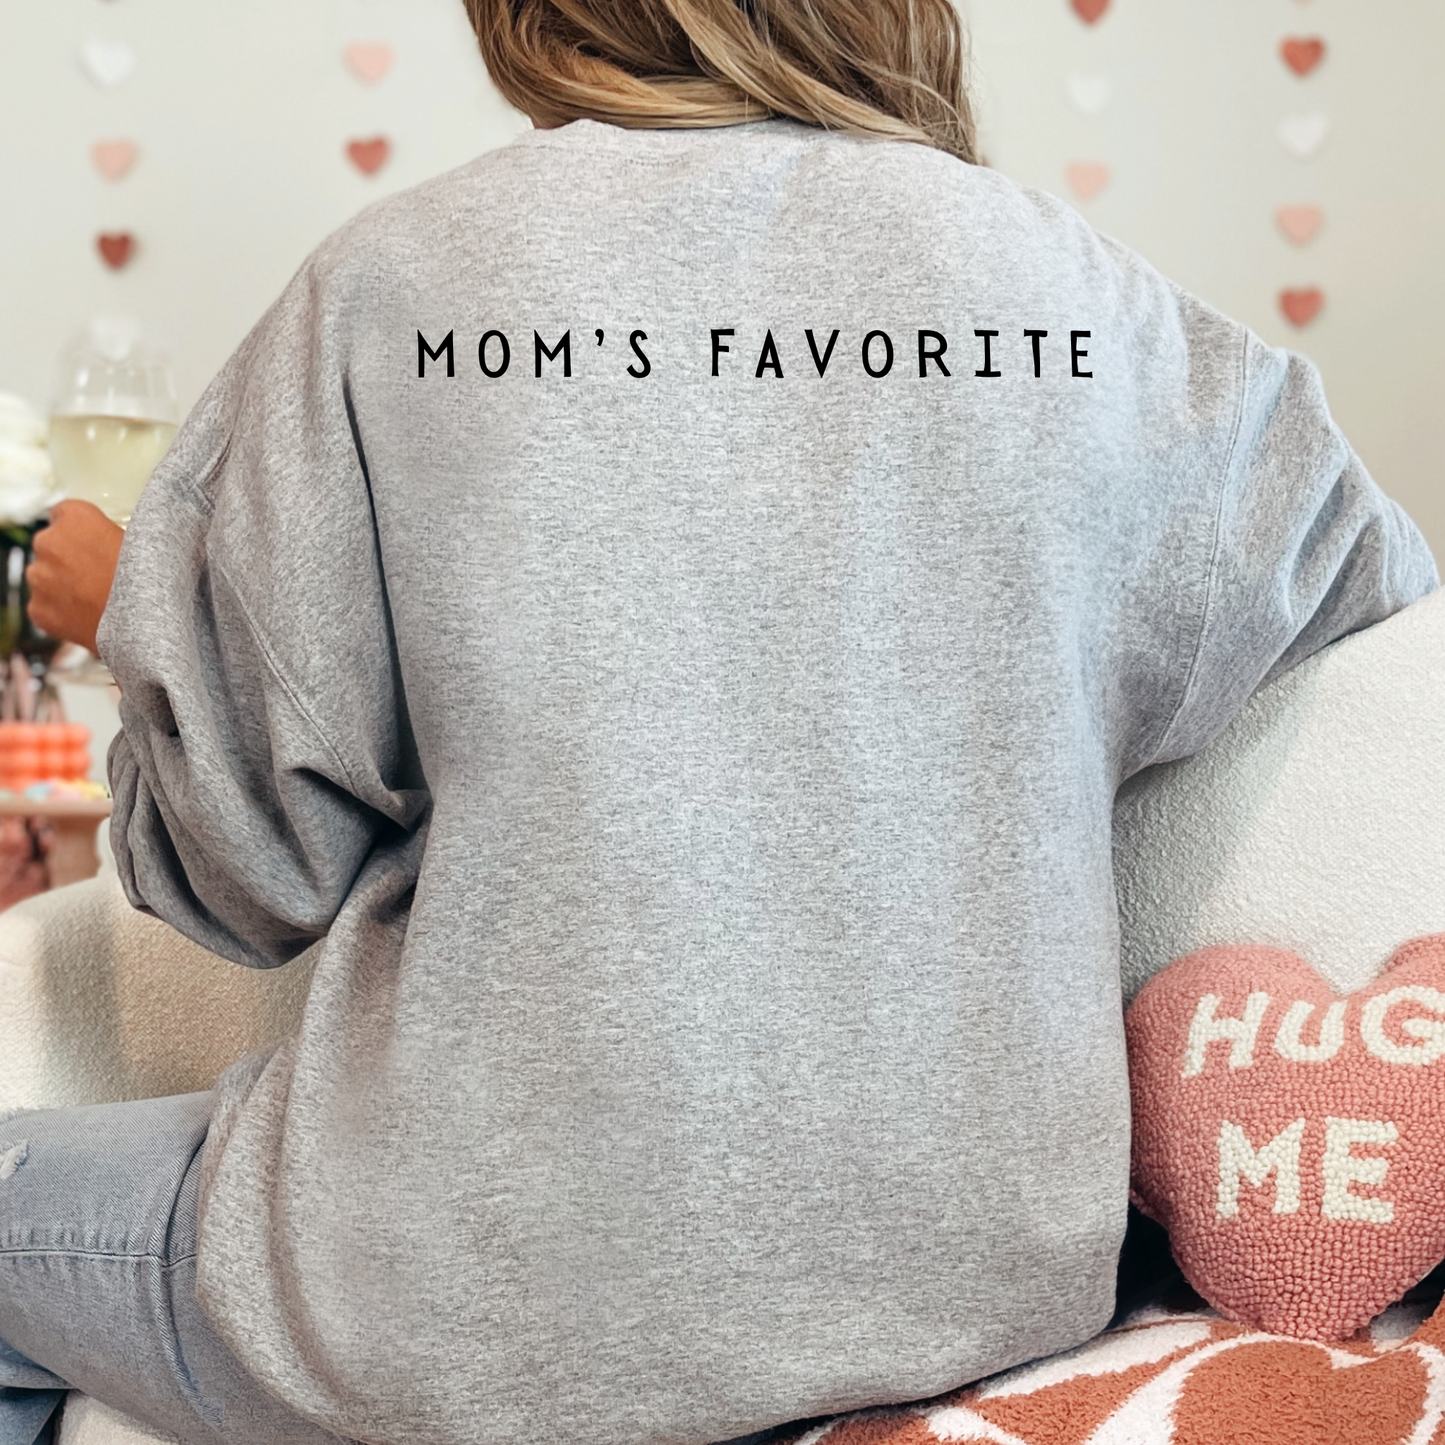 (shirt not included) Mom's Favorite - Matte Clear Film Transfer